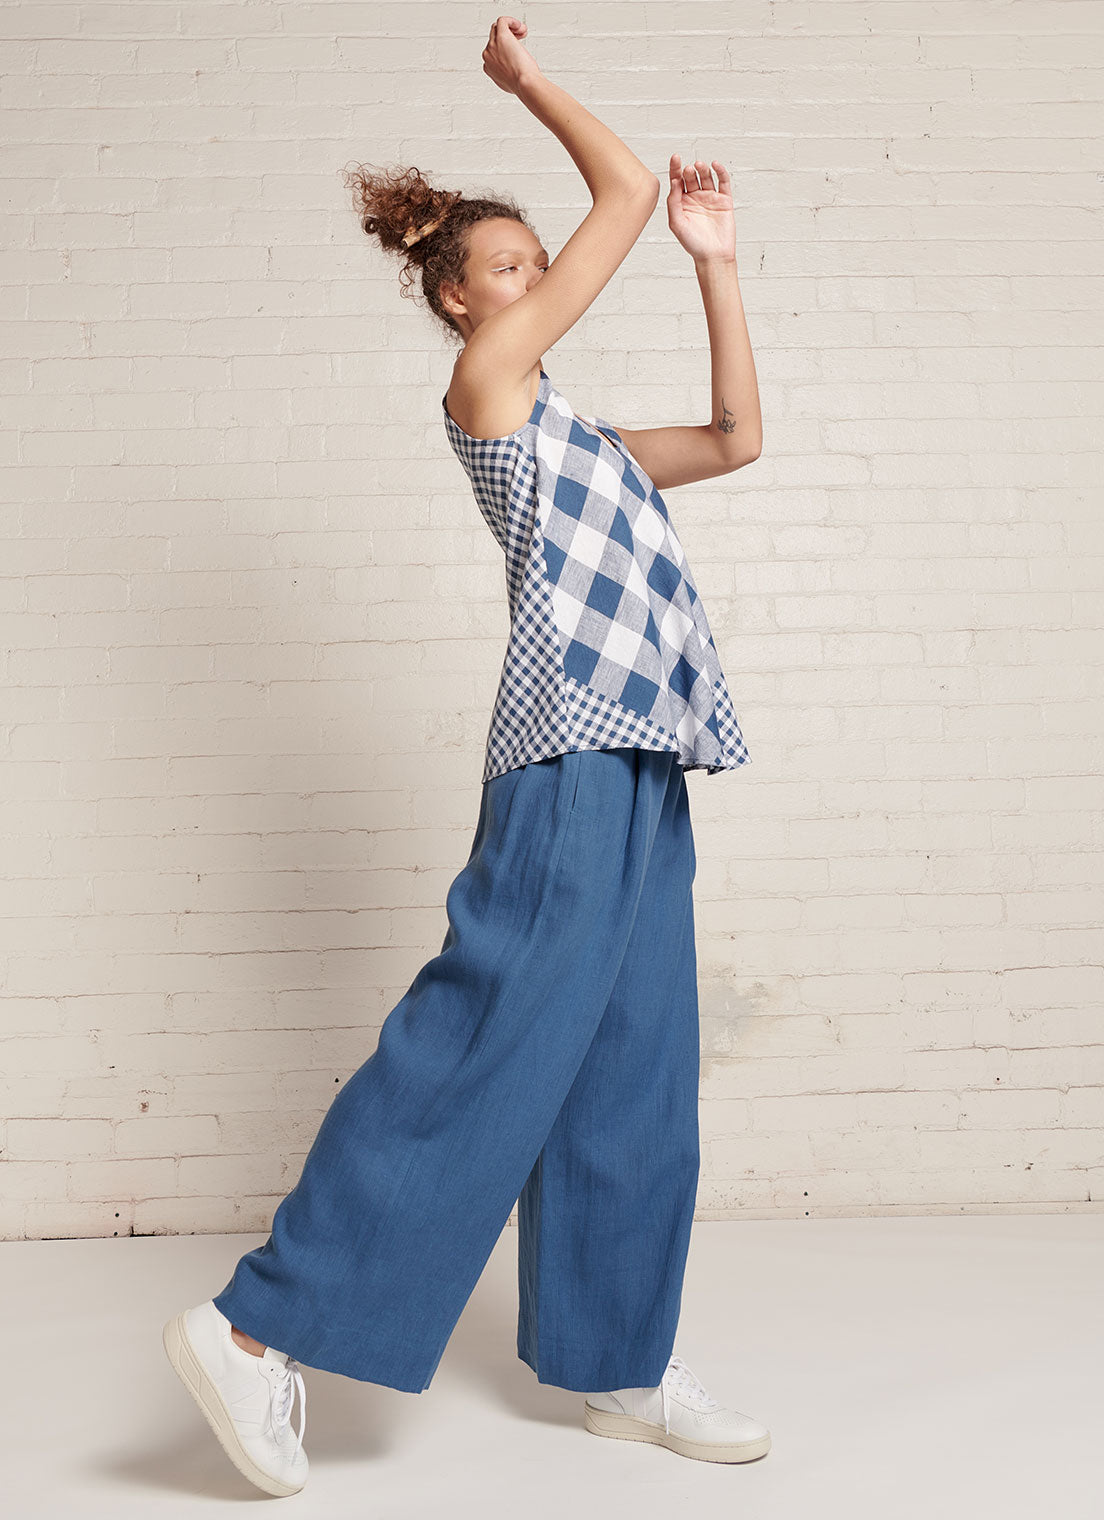 An indigo and white gingham, sleeveless tank top with round neckline made from mixed gingham yarn dye washed linen